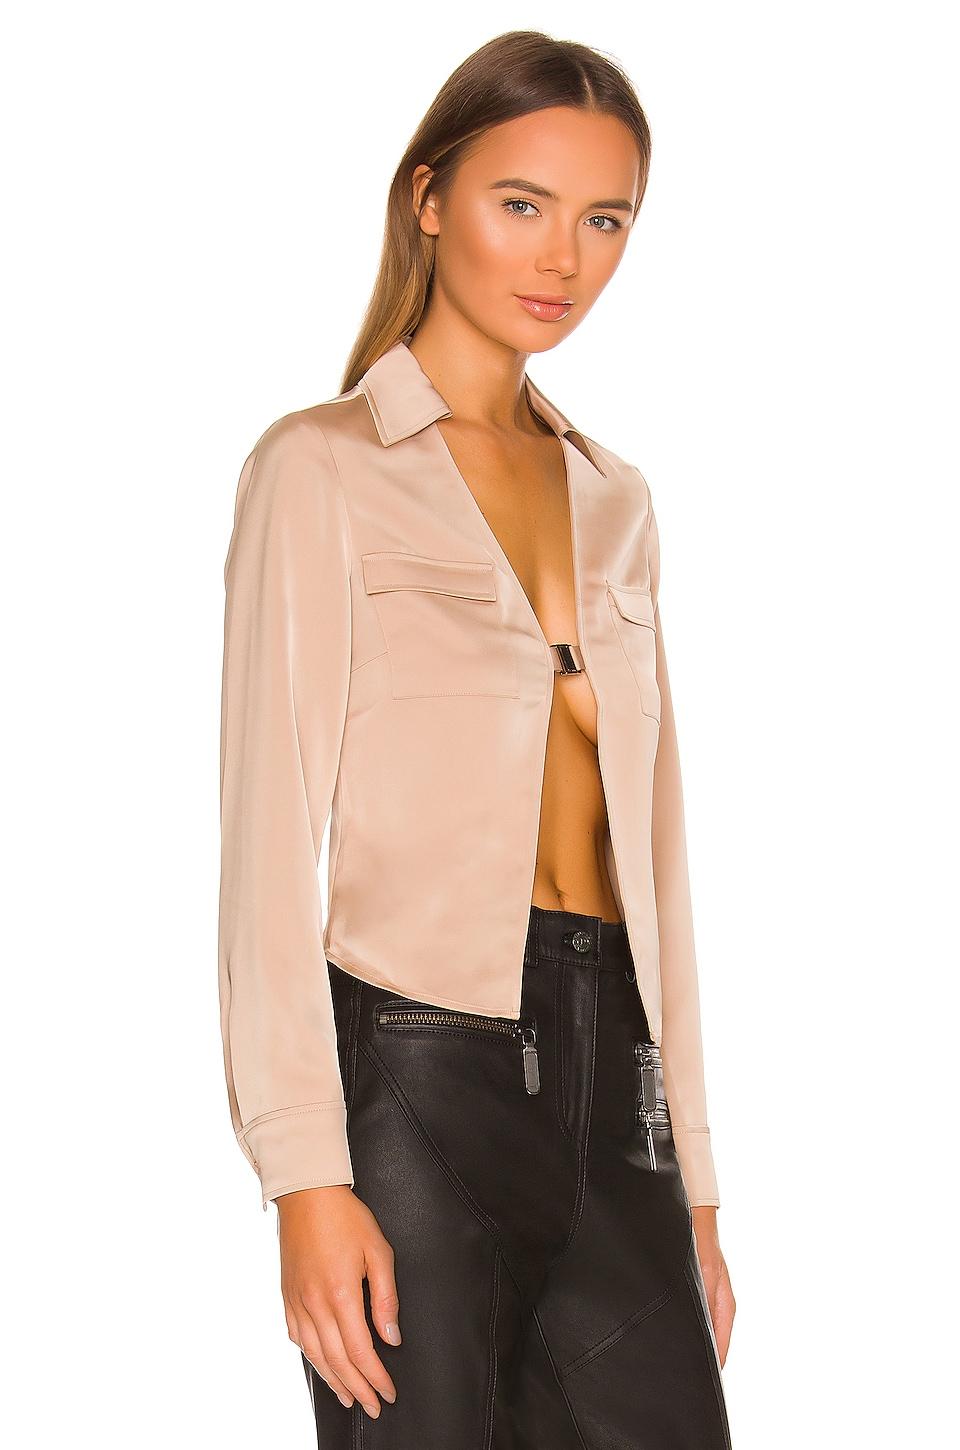 h:ours Satin Laila Top in Nude (Natural) - Lyst